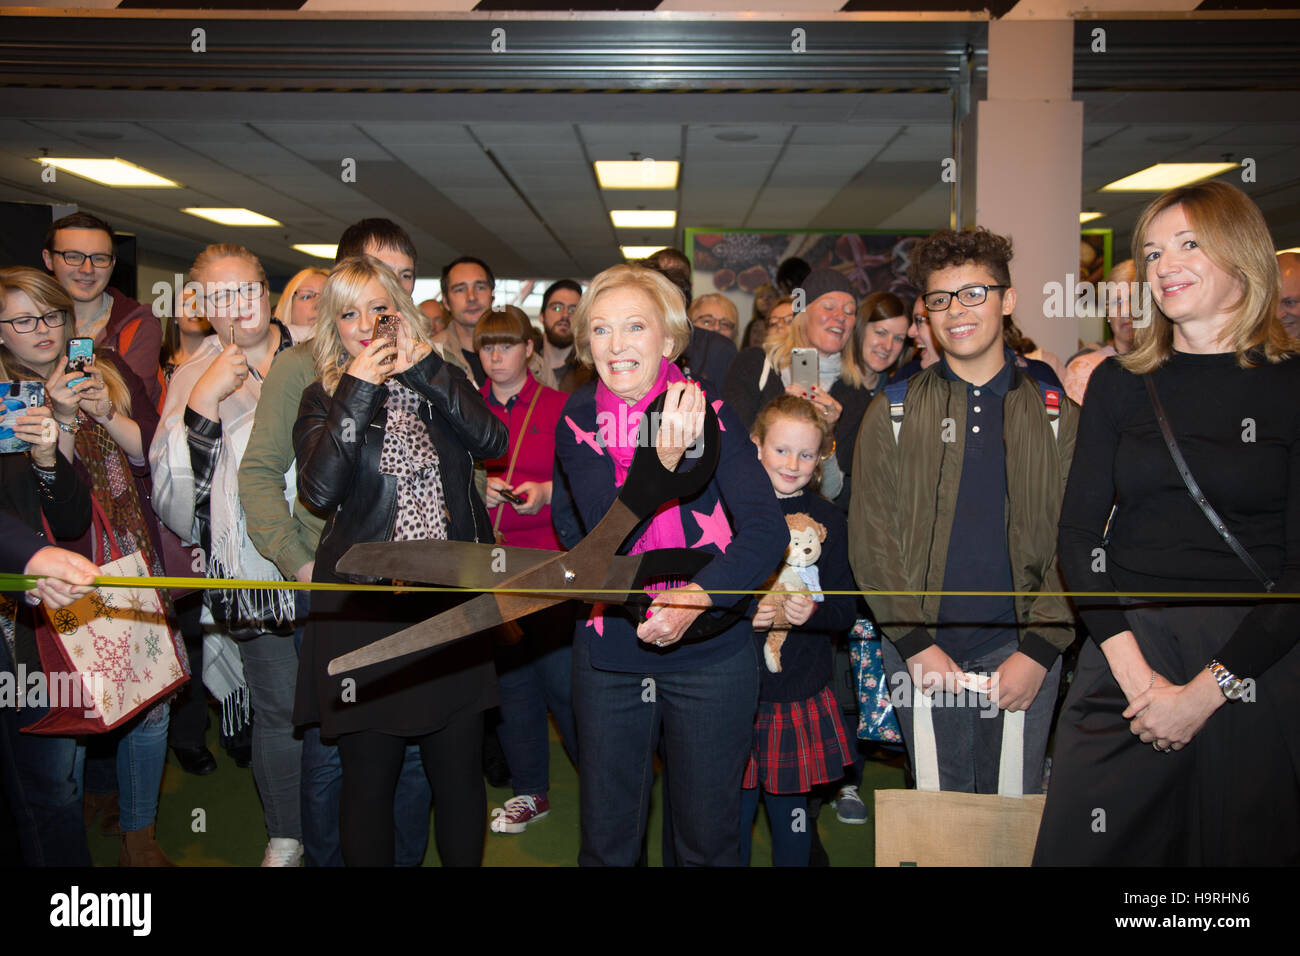 Birmingham, UK. 26th November, 2016. Mary Berry opens the Good Food Show allowing the rowds into the show Credit:  steven roe/Alamy Live News Stock Photo